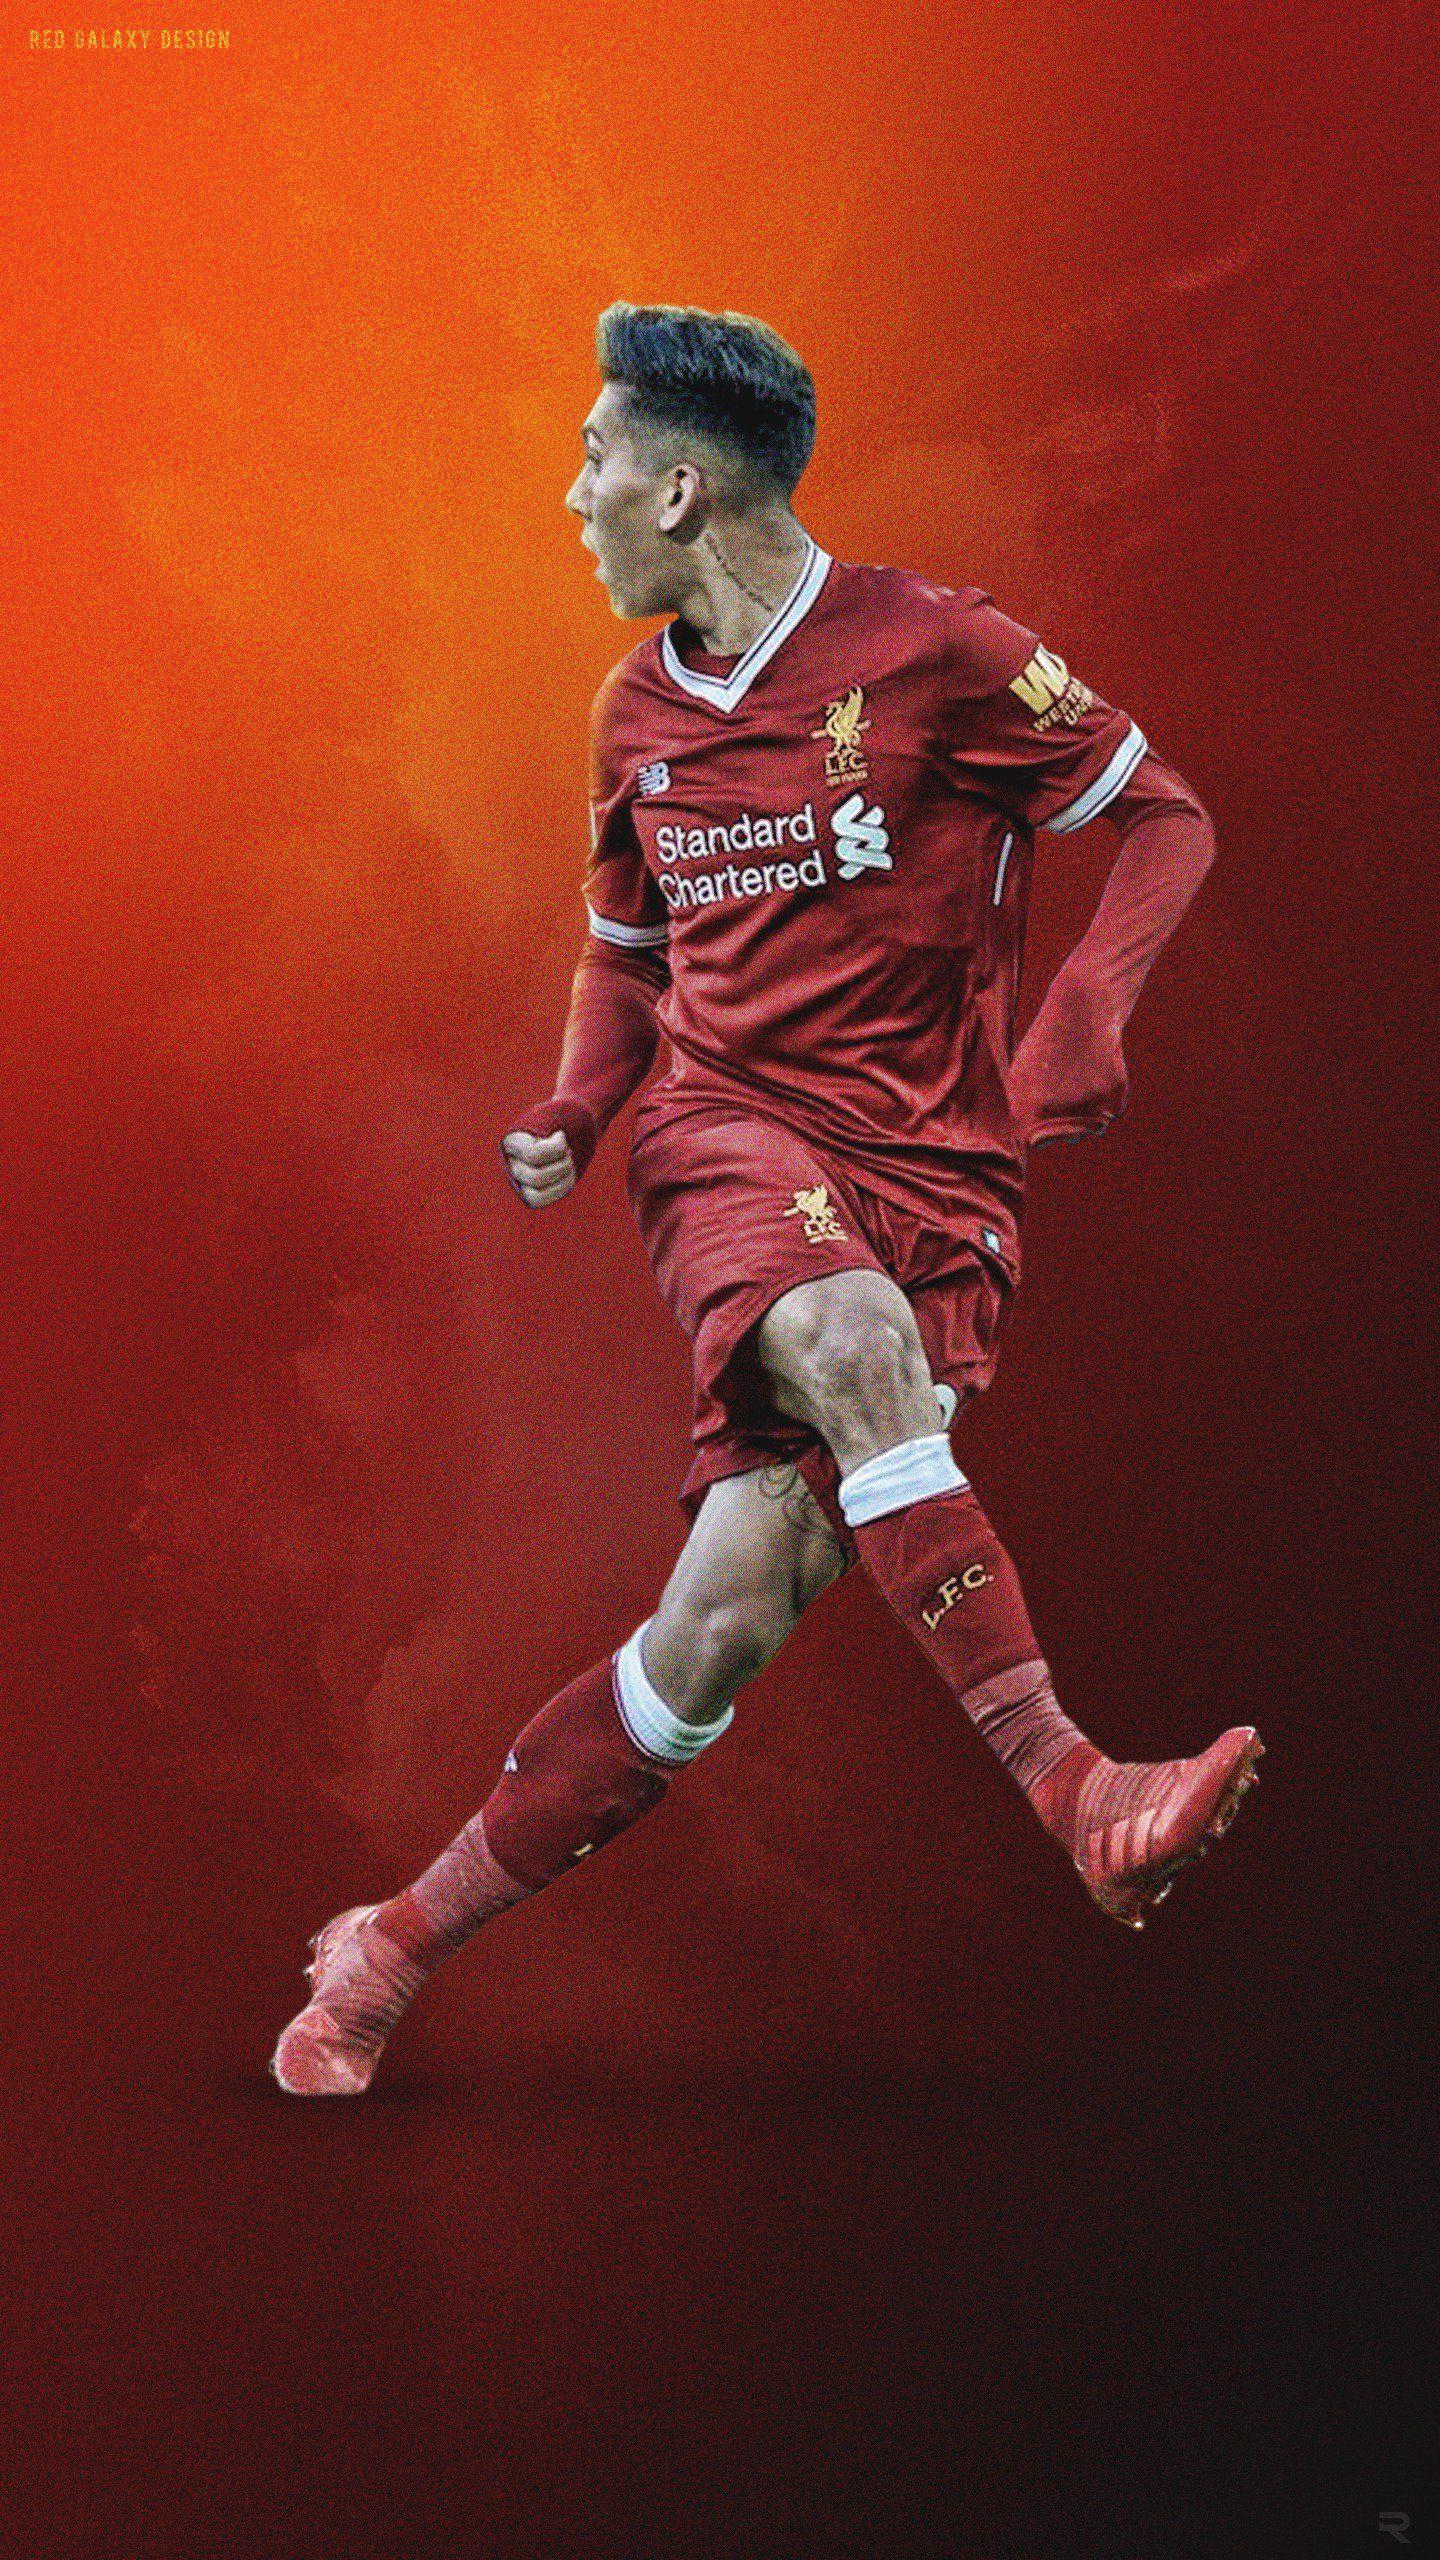 No look firmino awesome Phone wallpaper by red galaxy design